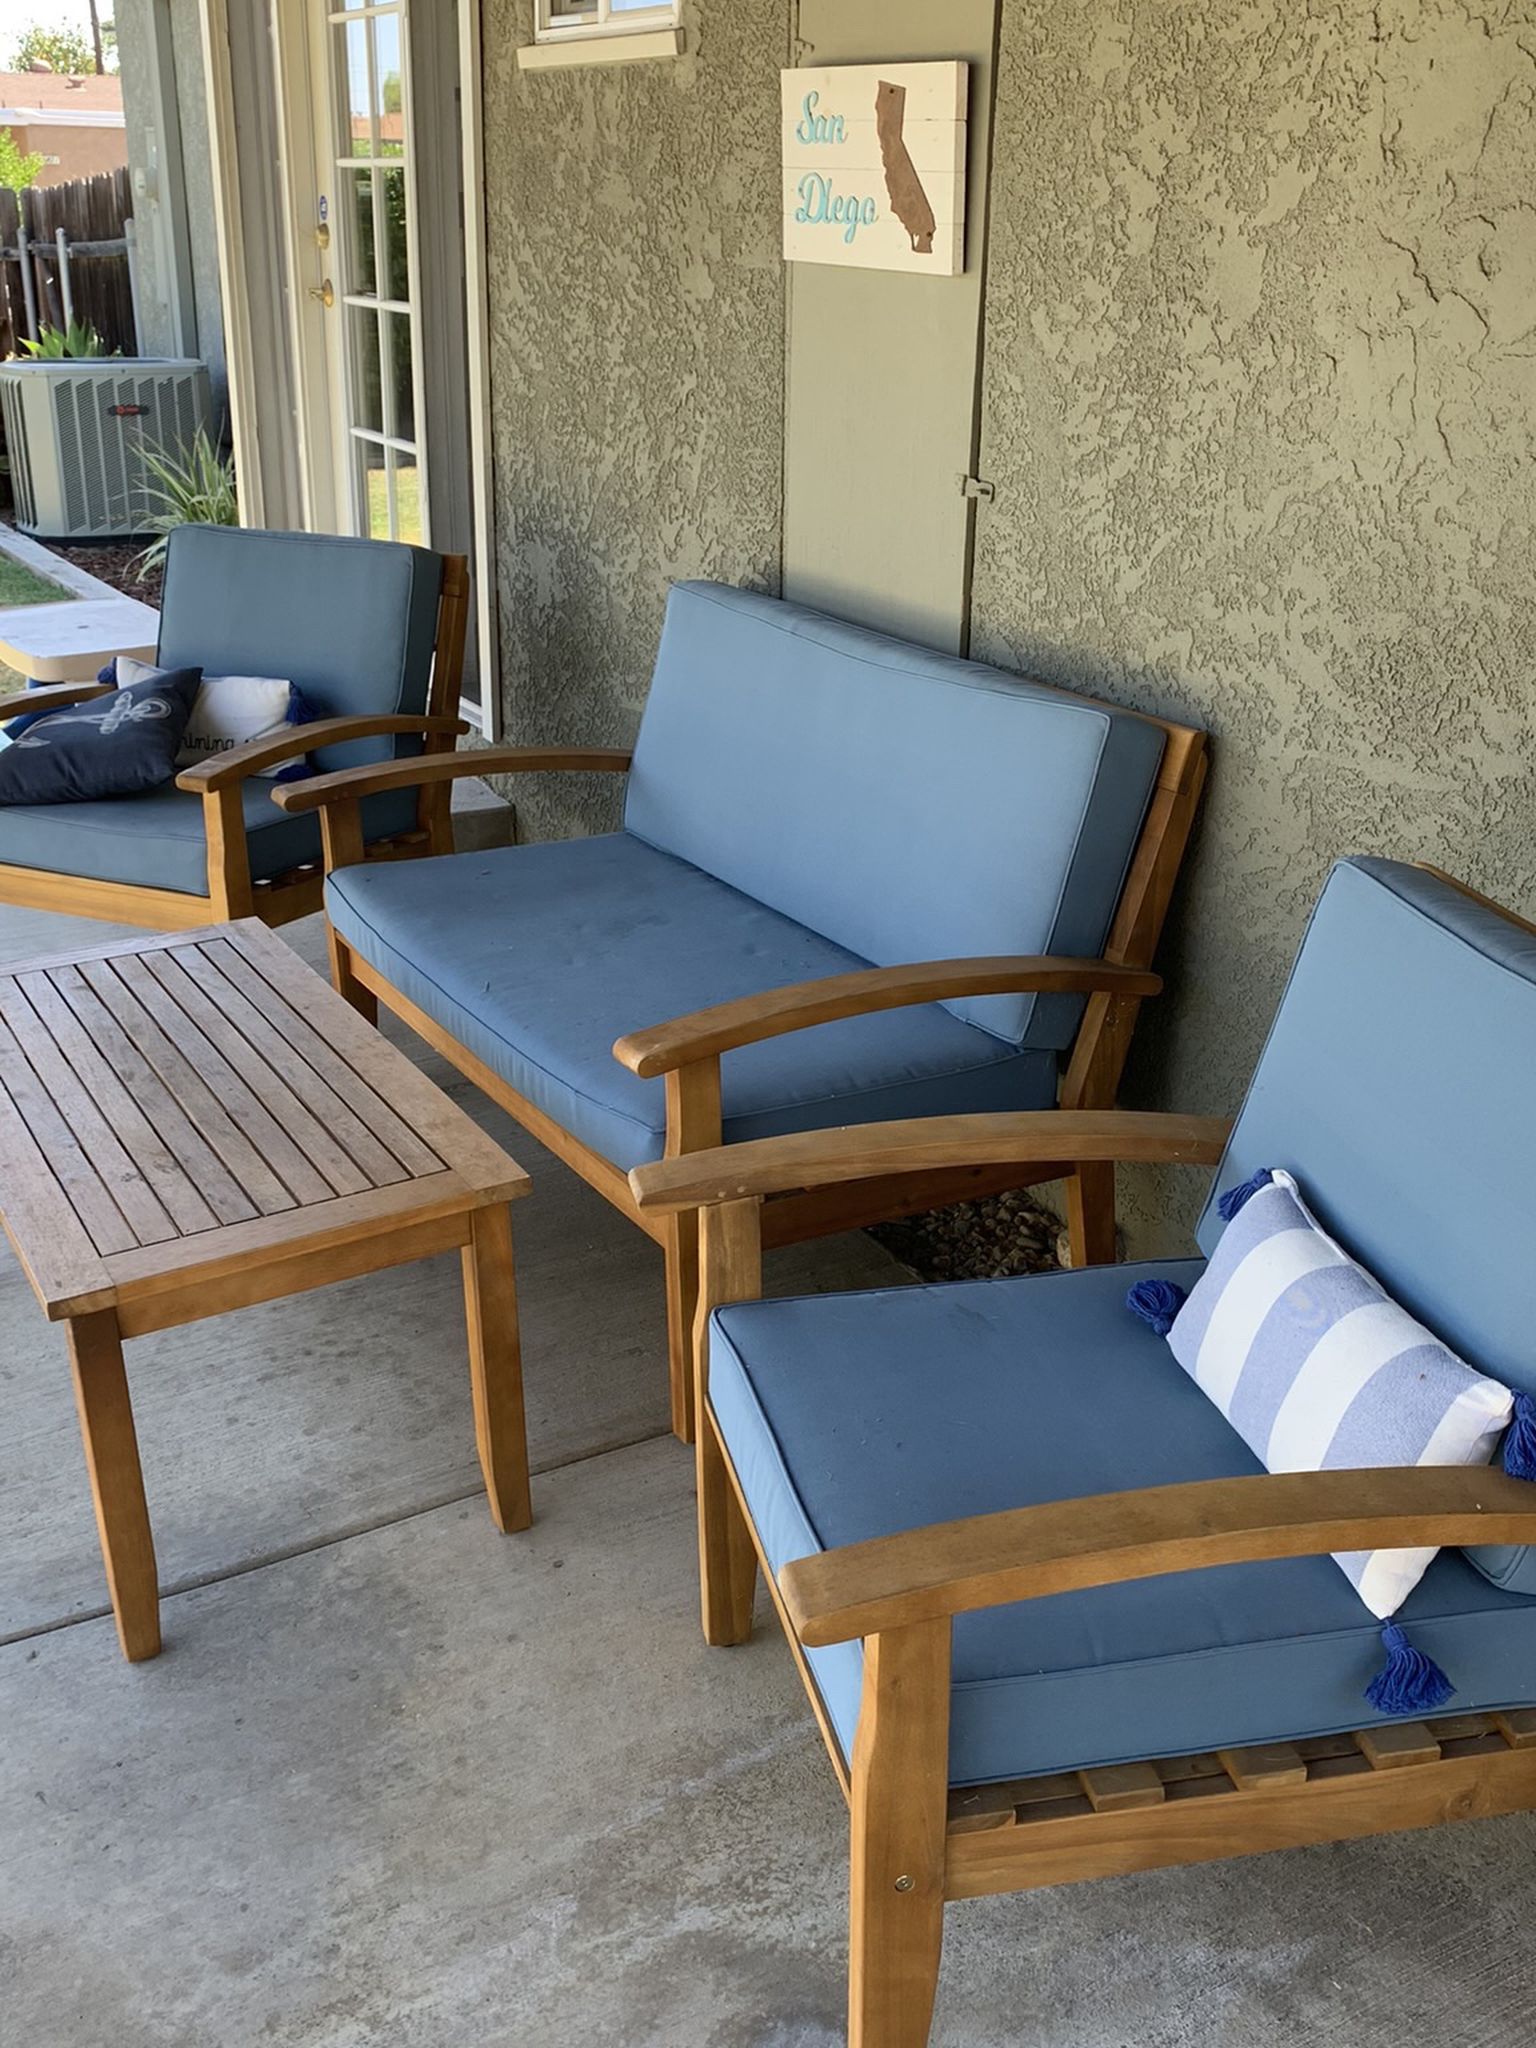 Beautiful Wooden Patio Chairs, Cushions & Table